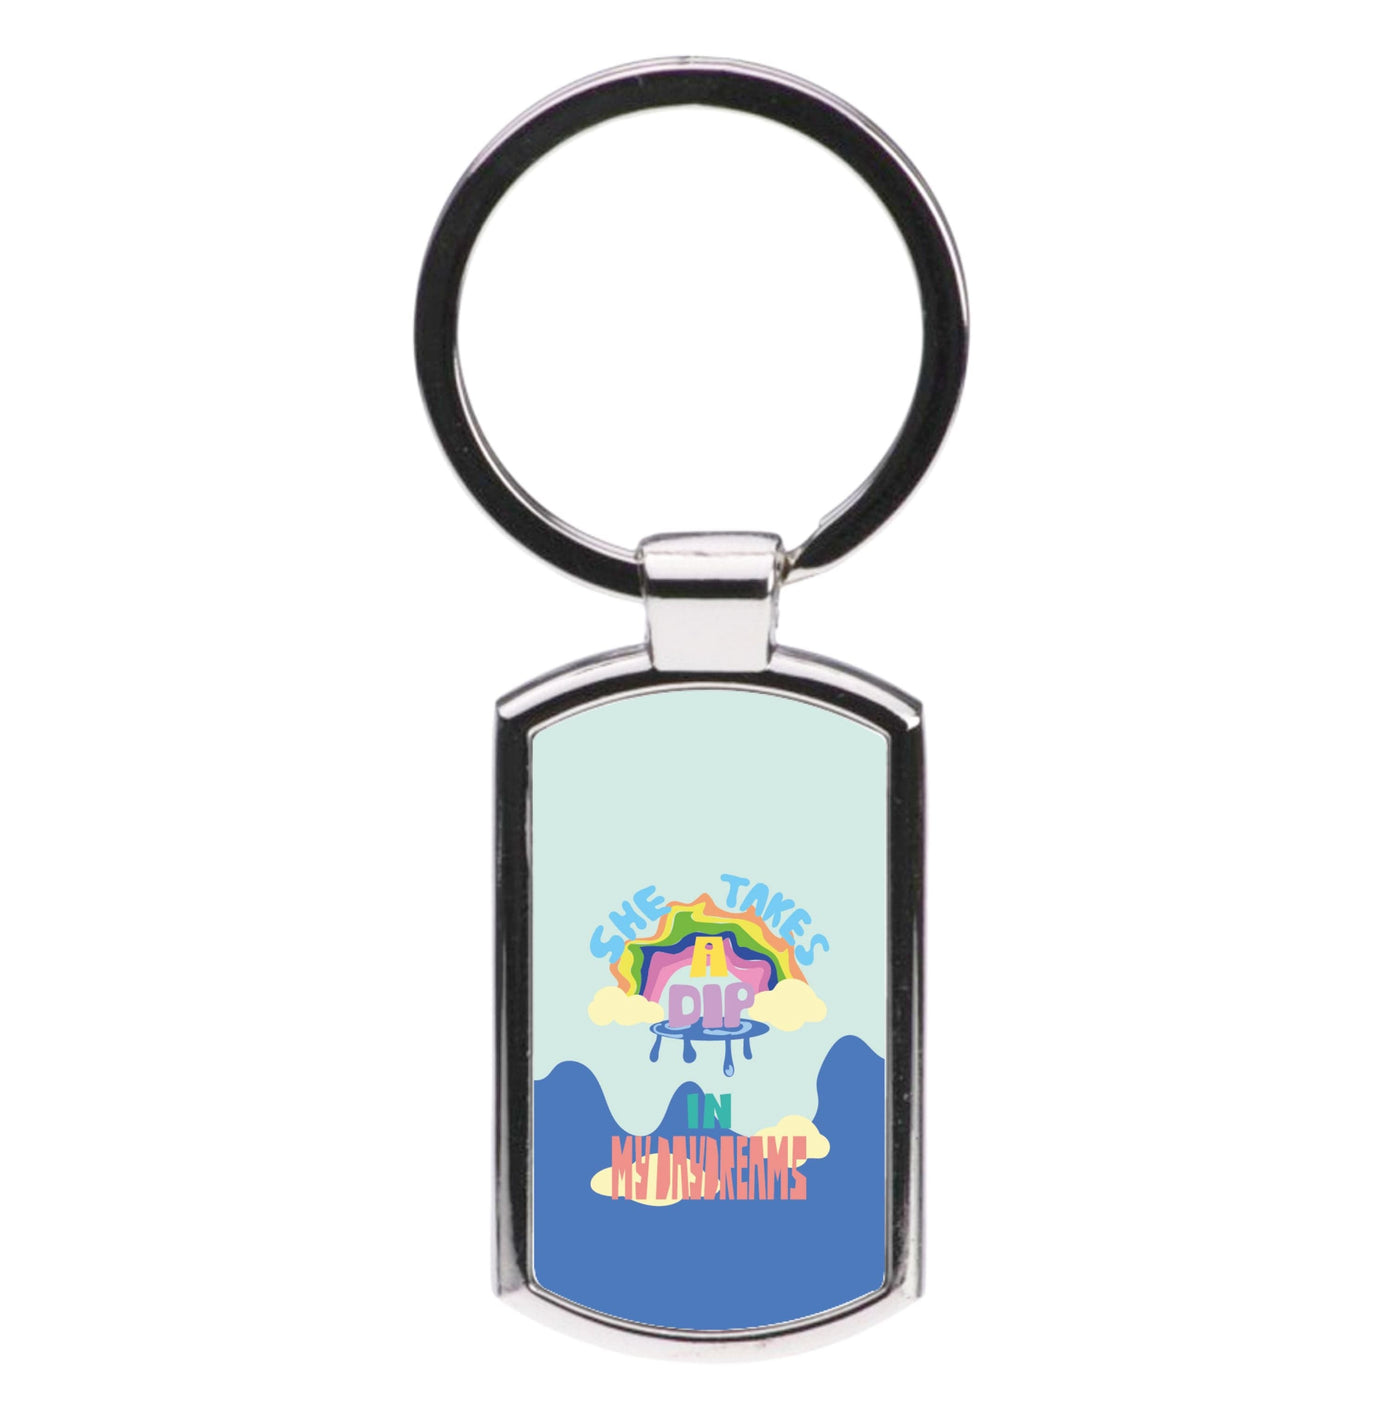 She takes a dip in my daydreams - Arctic Monkeys Luxury Keyring